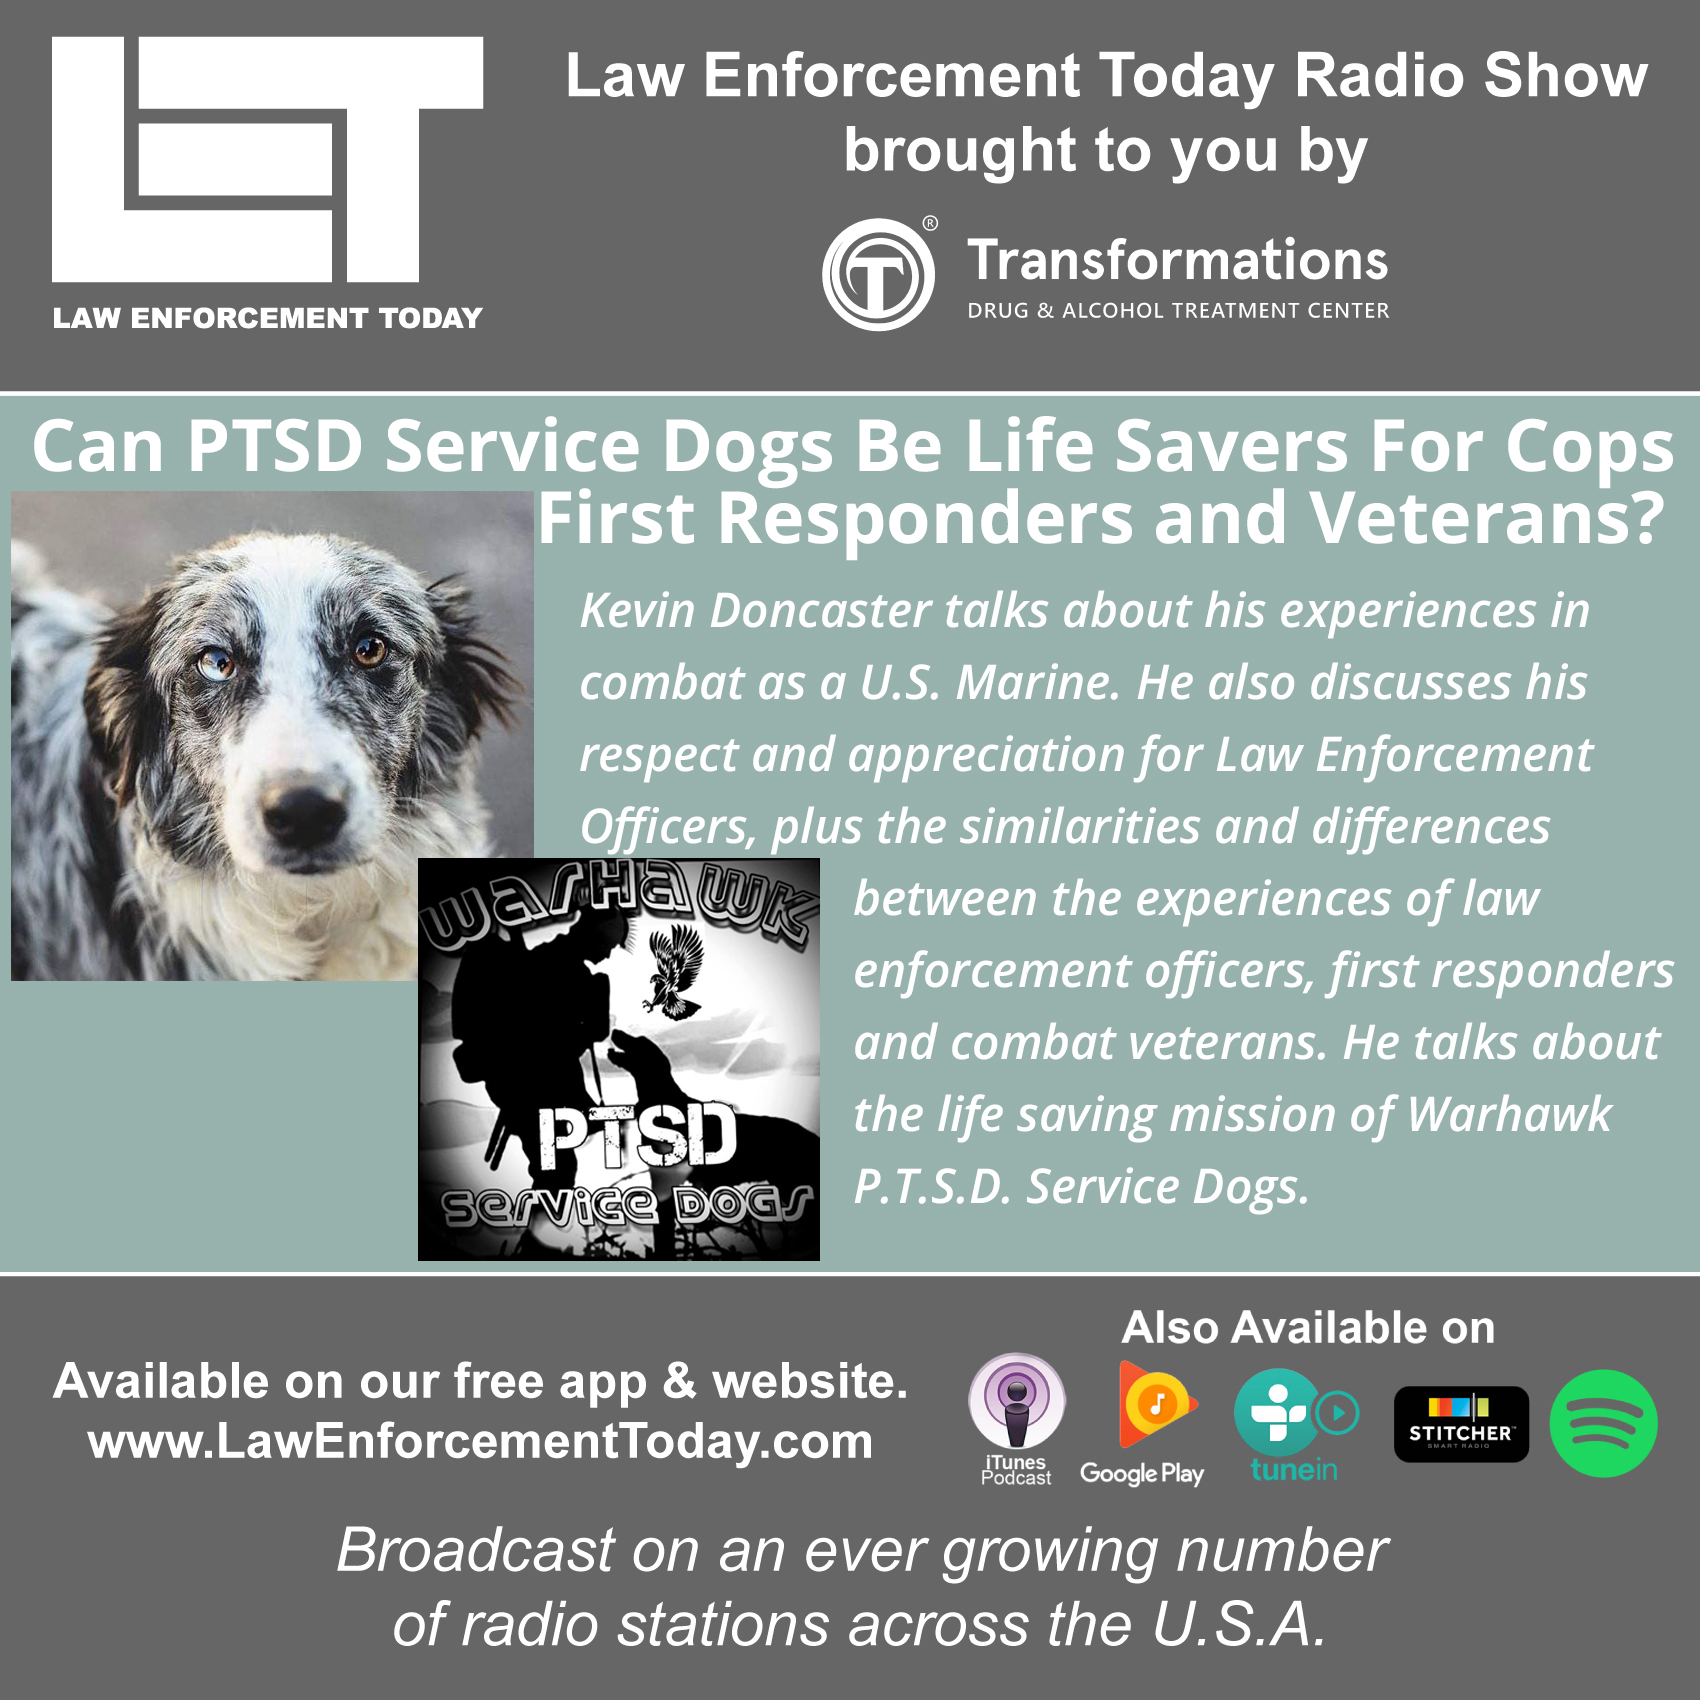 Service Dogs Life Savers For Cops, First Responders and Veterans with PTSD?